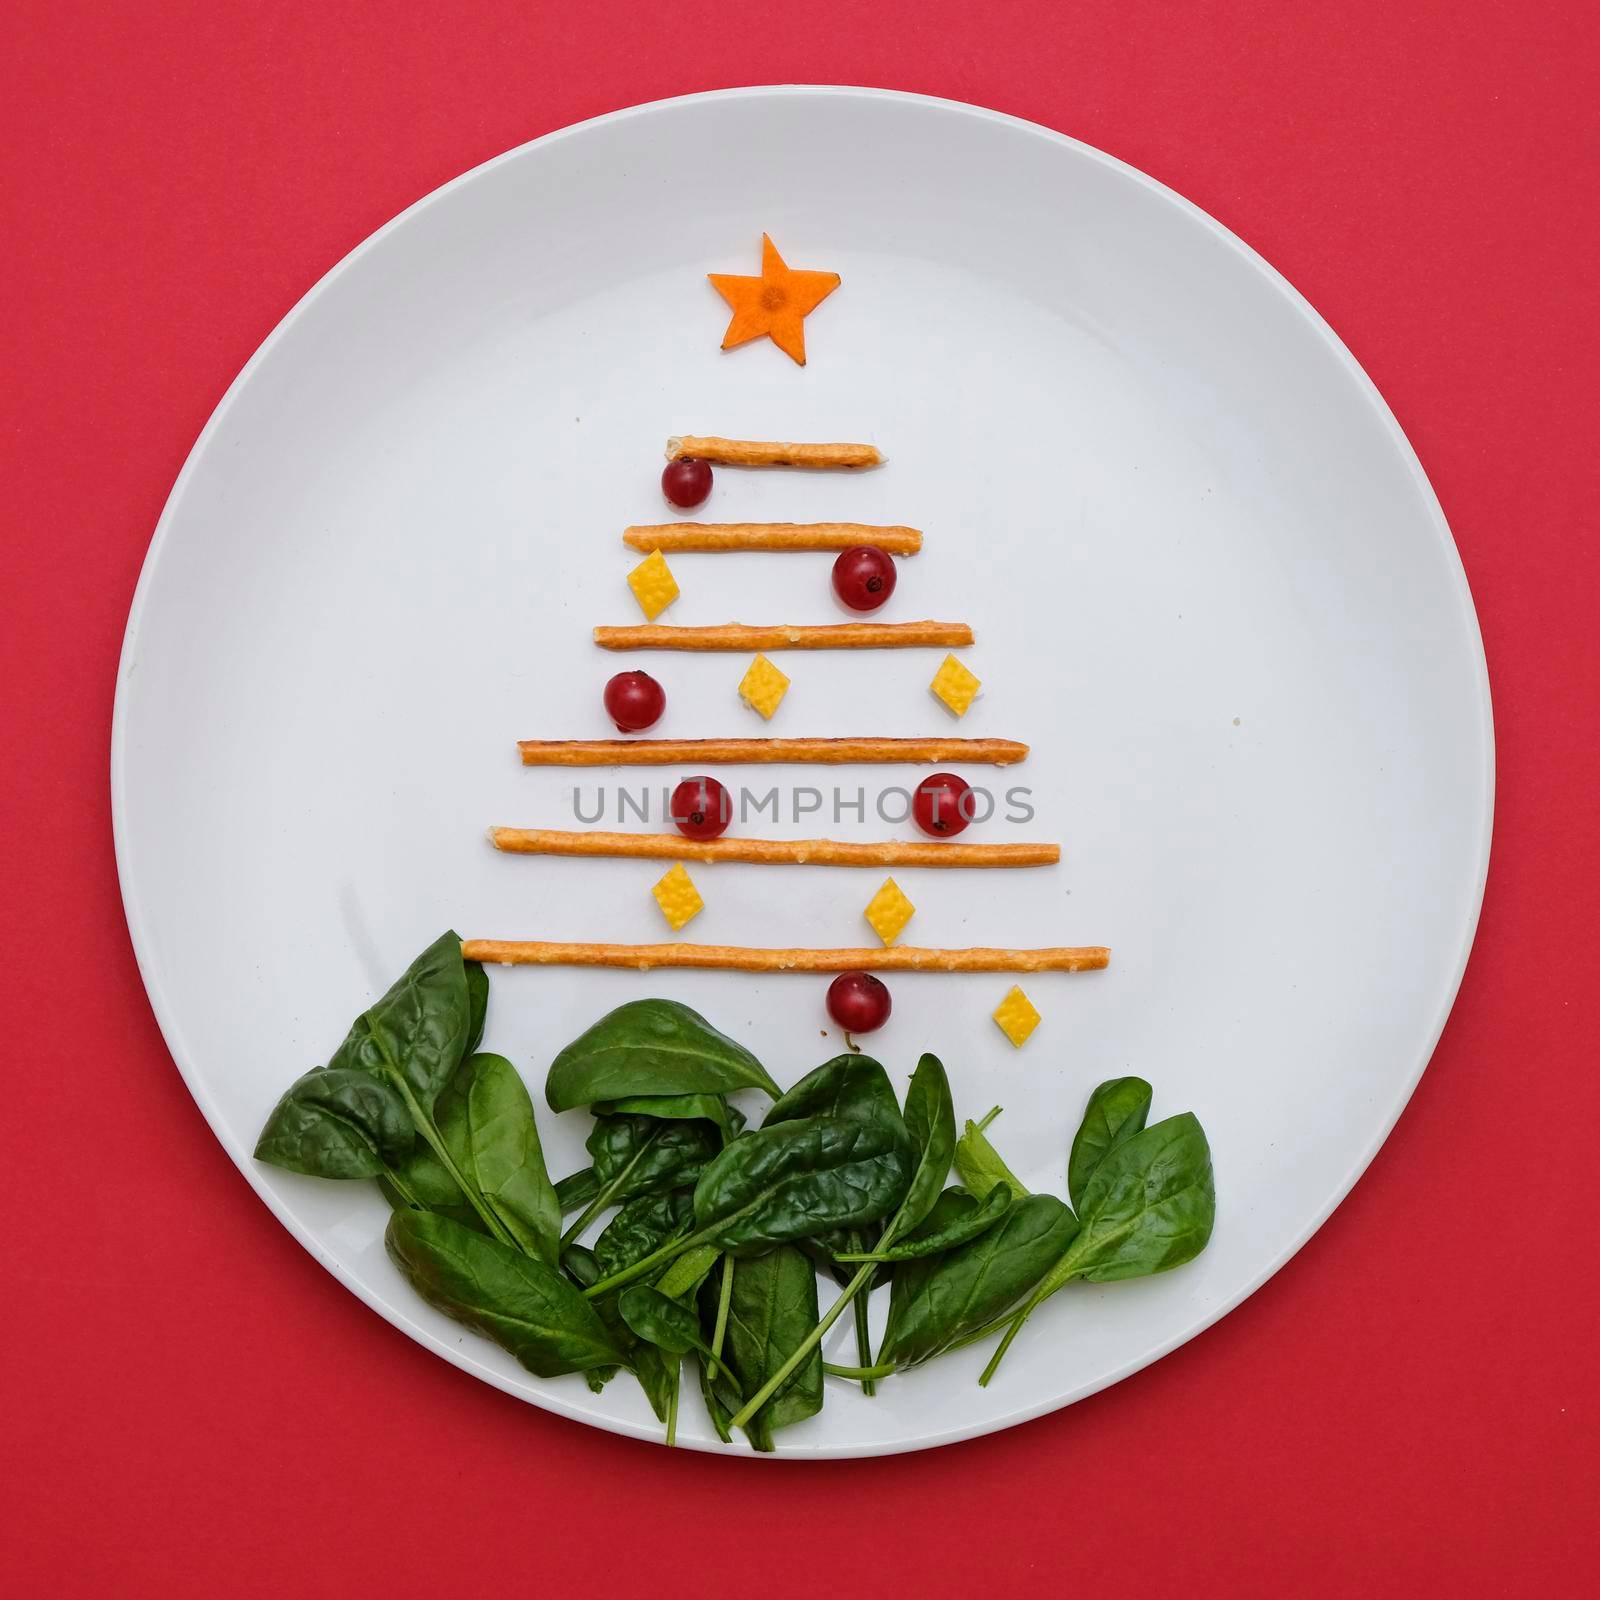 Creative edible christmas tree, food art minimalism. Food for kids and festive table. Tree made from sticks on a plate on red background. by natus111